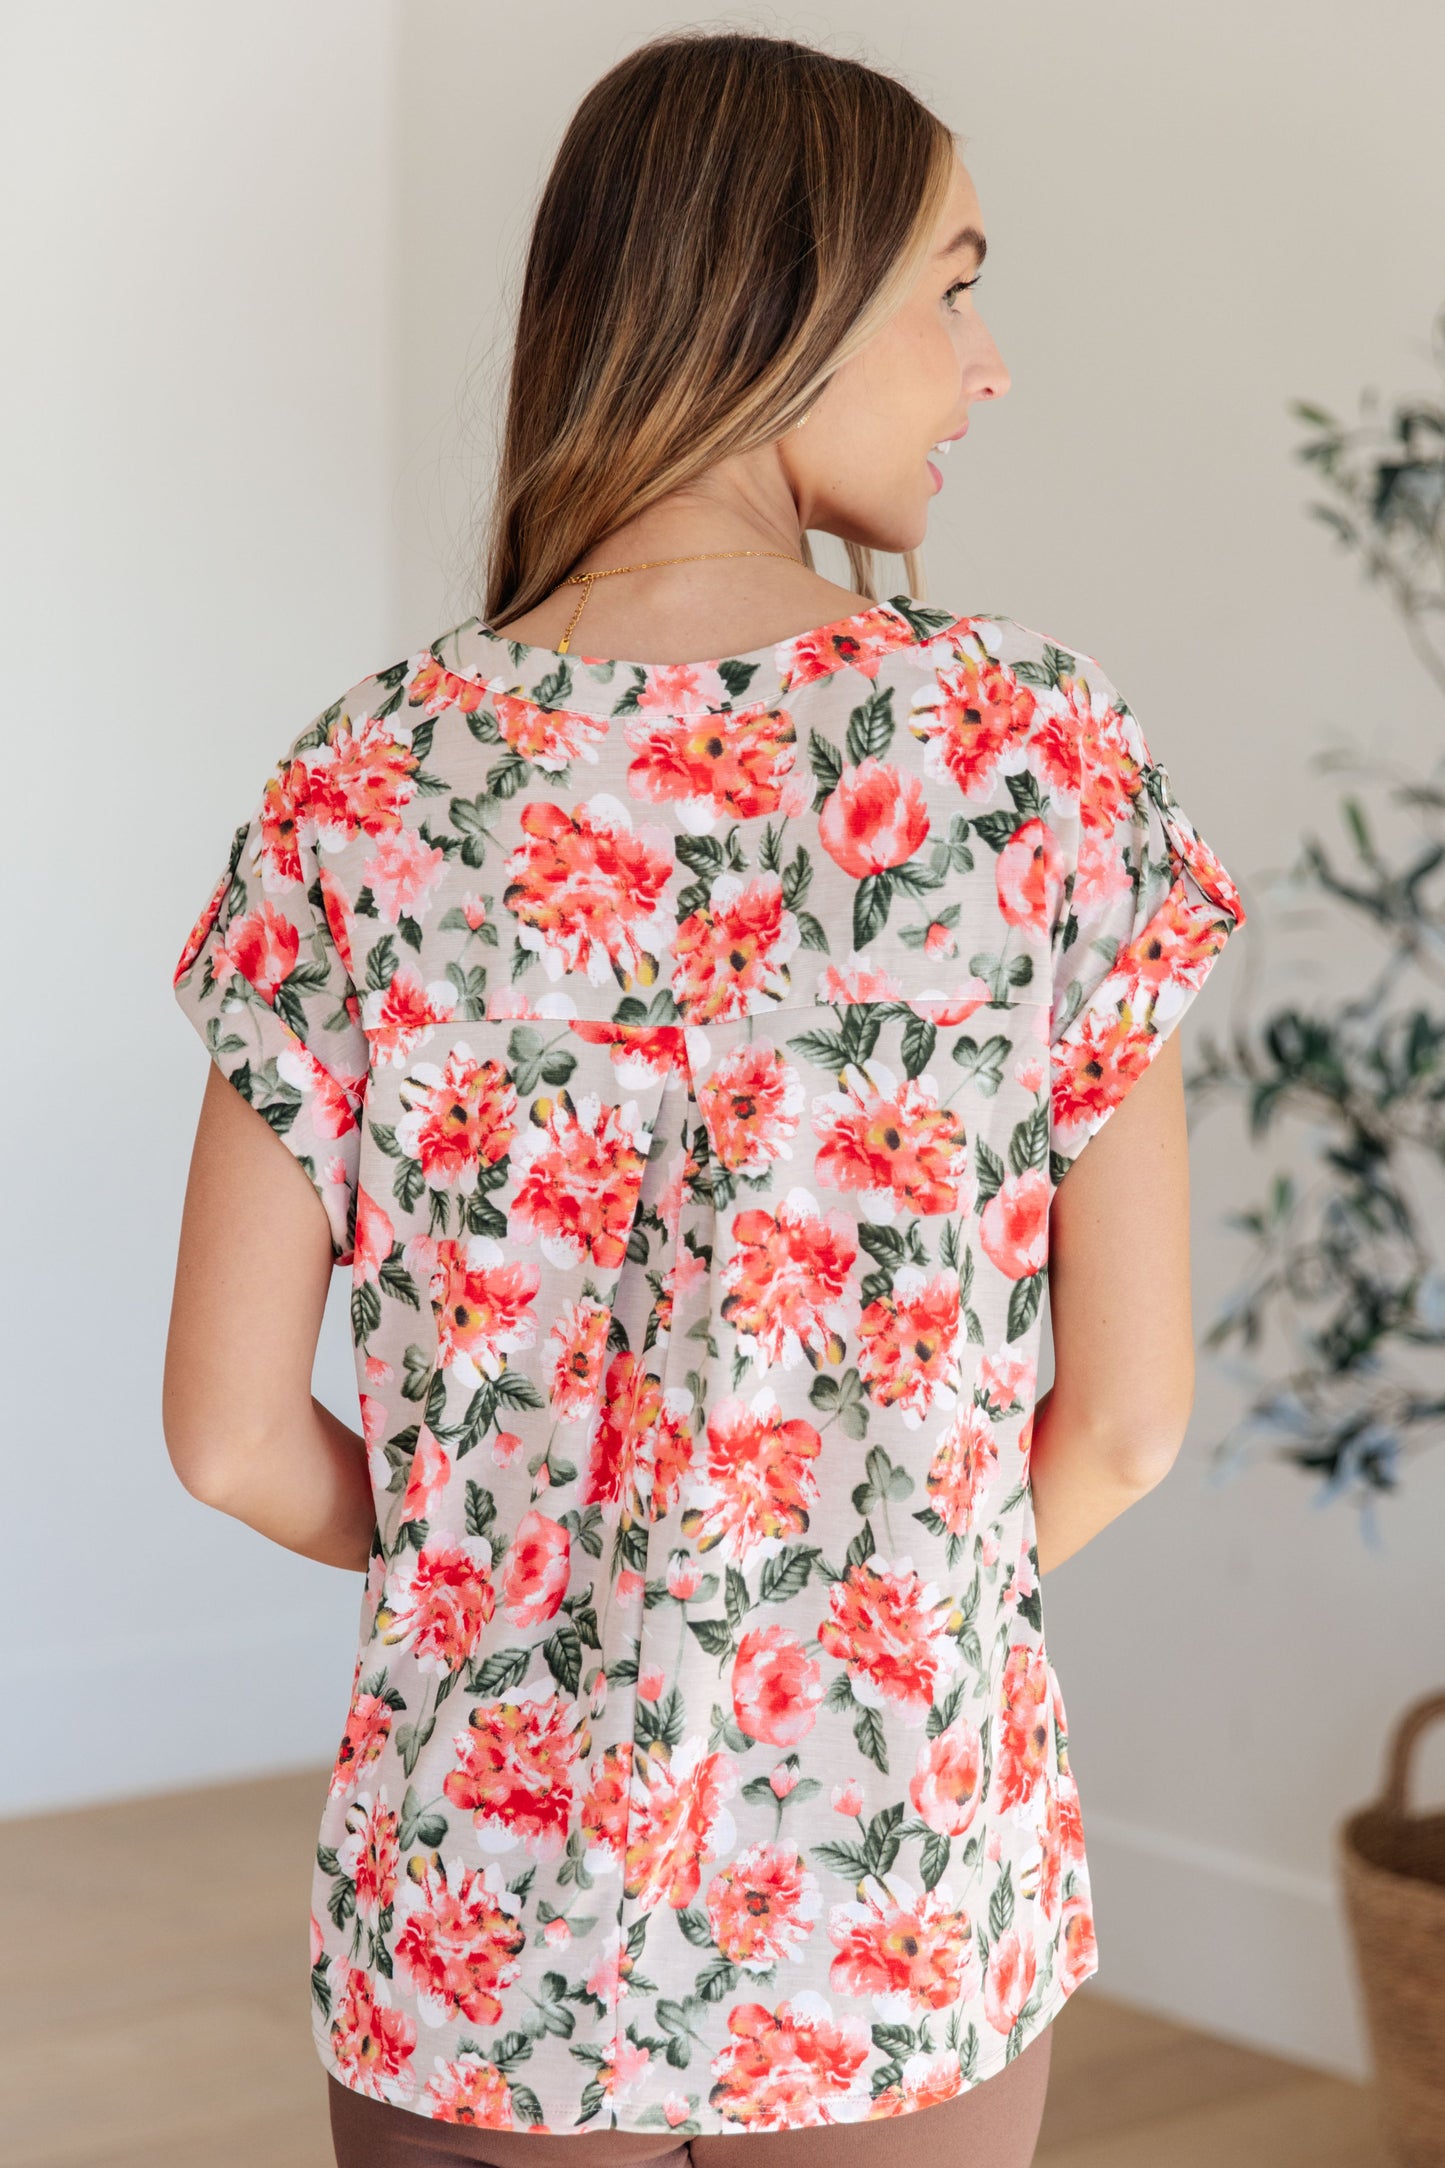 Dear Scarlett Lizzy Cap Sleeve Top in Coral and Beige Floral